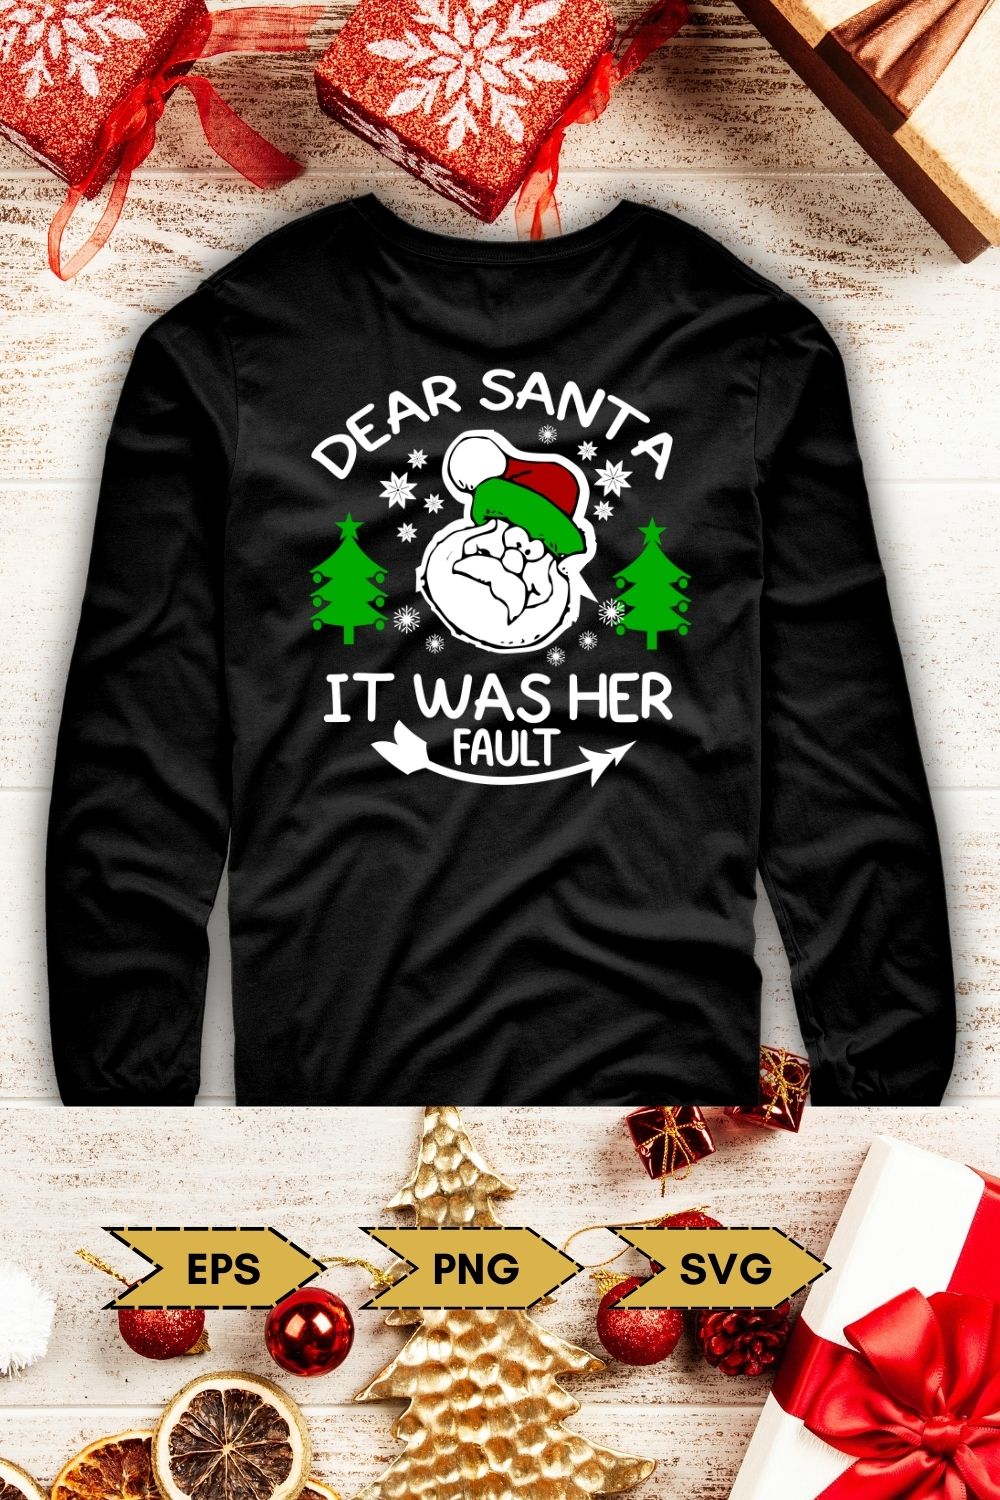 Image of a black sweatshirt with a beautiful print on the Christmas theme.